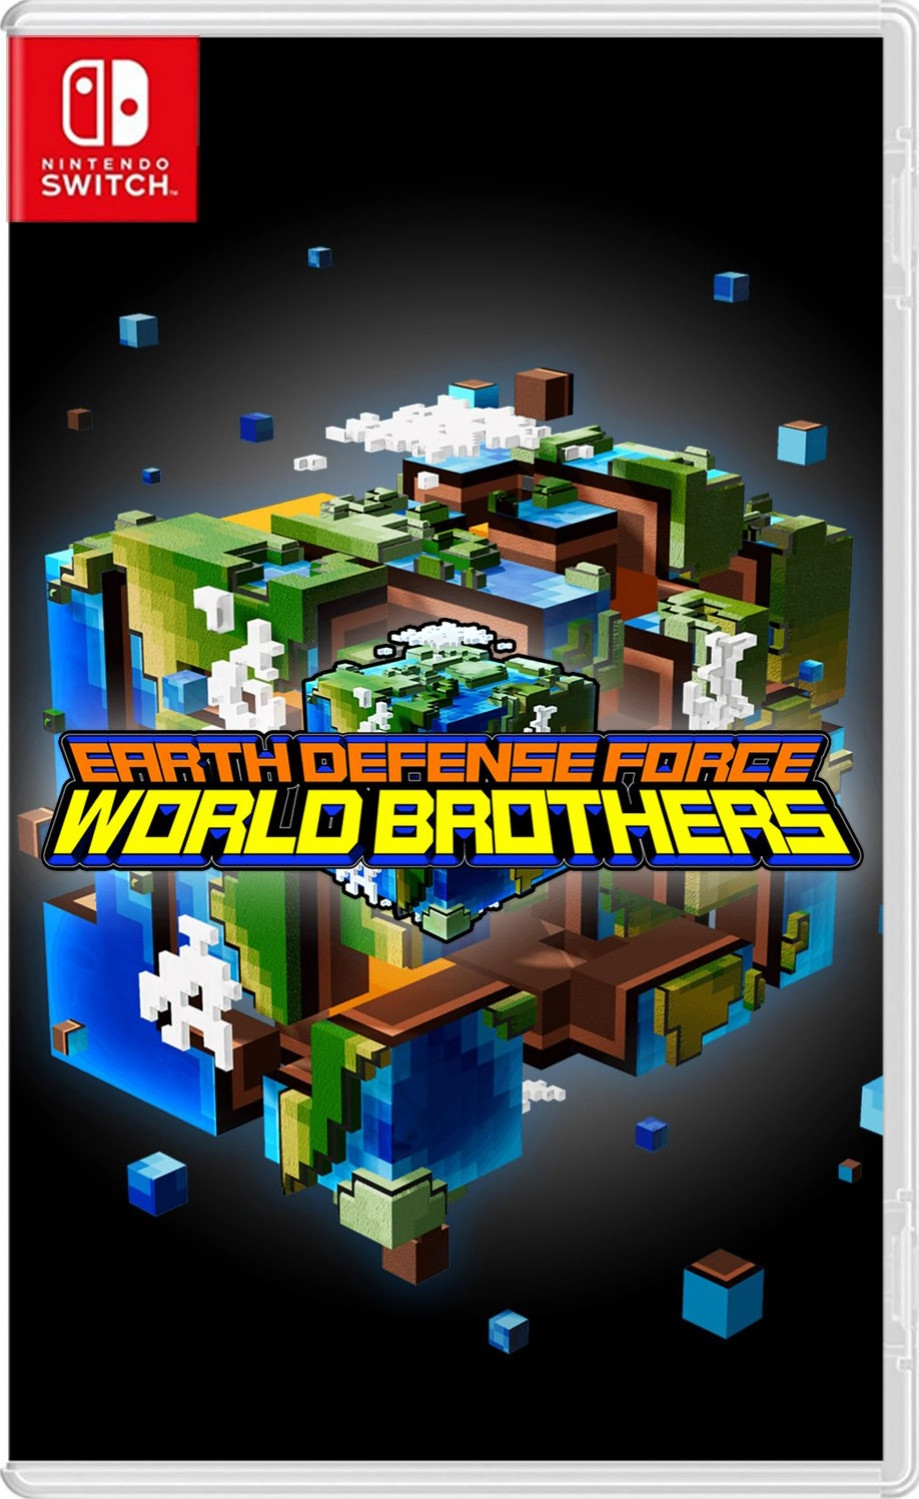 Earth Defense Force World Brothers - Nintendo Switch